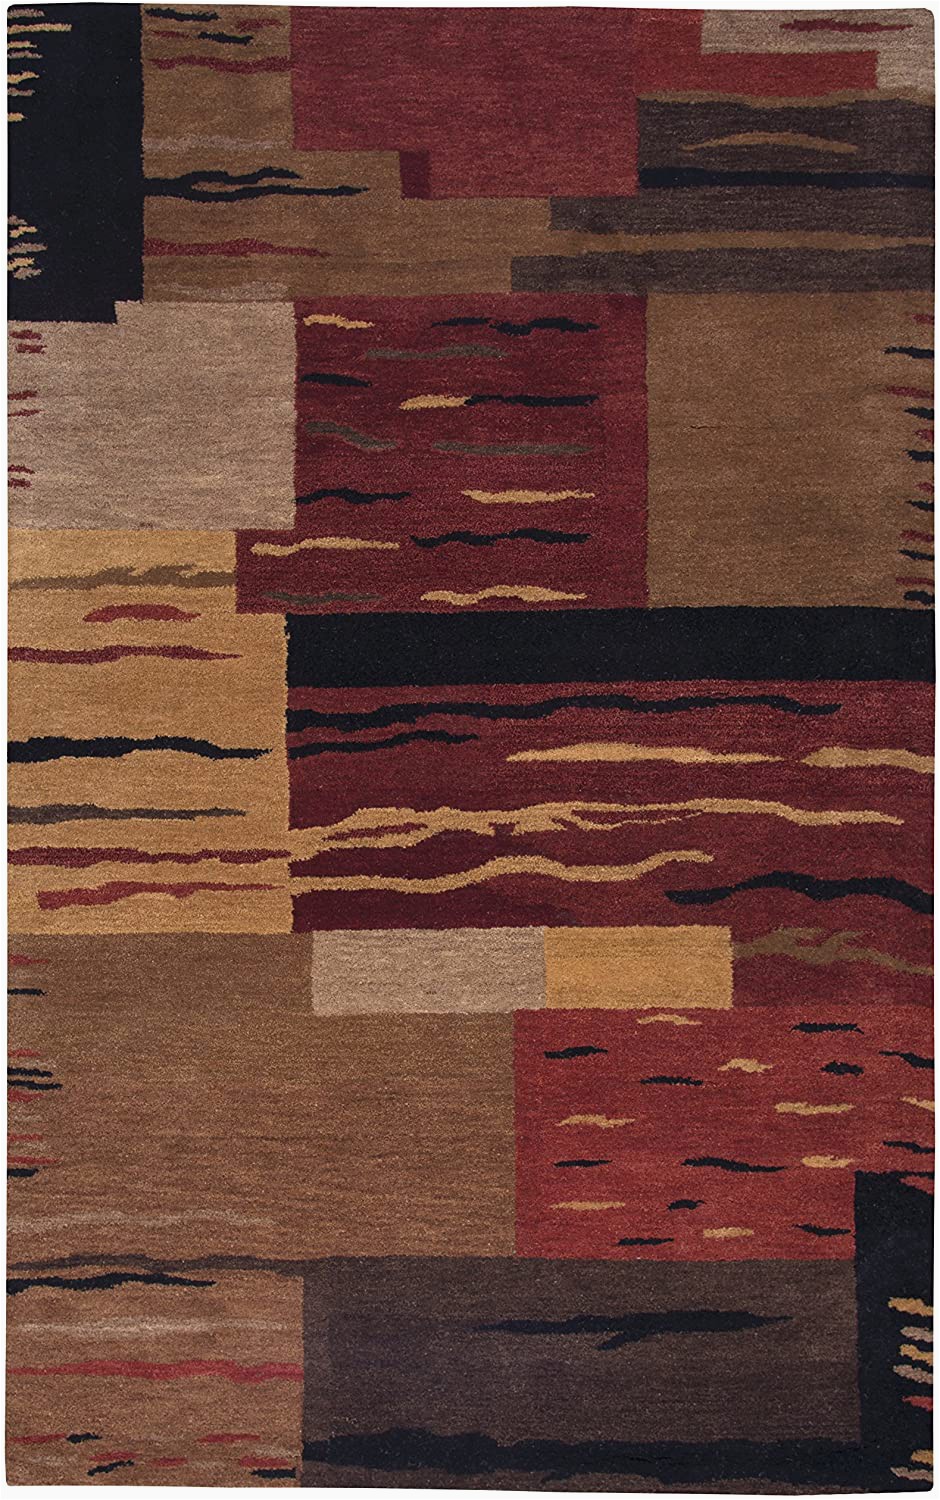 Red Brown and Tan area Rugs Rizzy Home Mojave Collection Wool area Rug 2 X 3 Multi Rust Brown Camel Tan Red